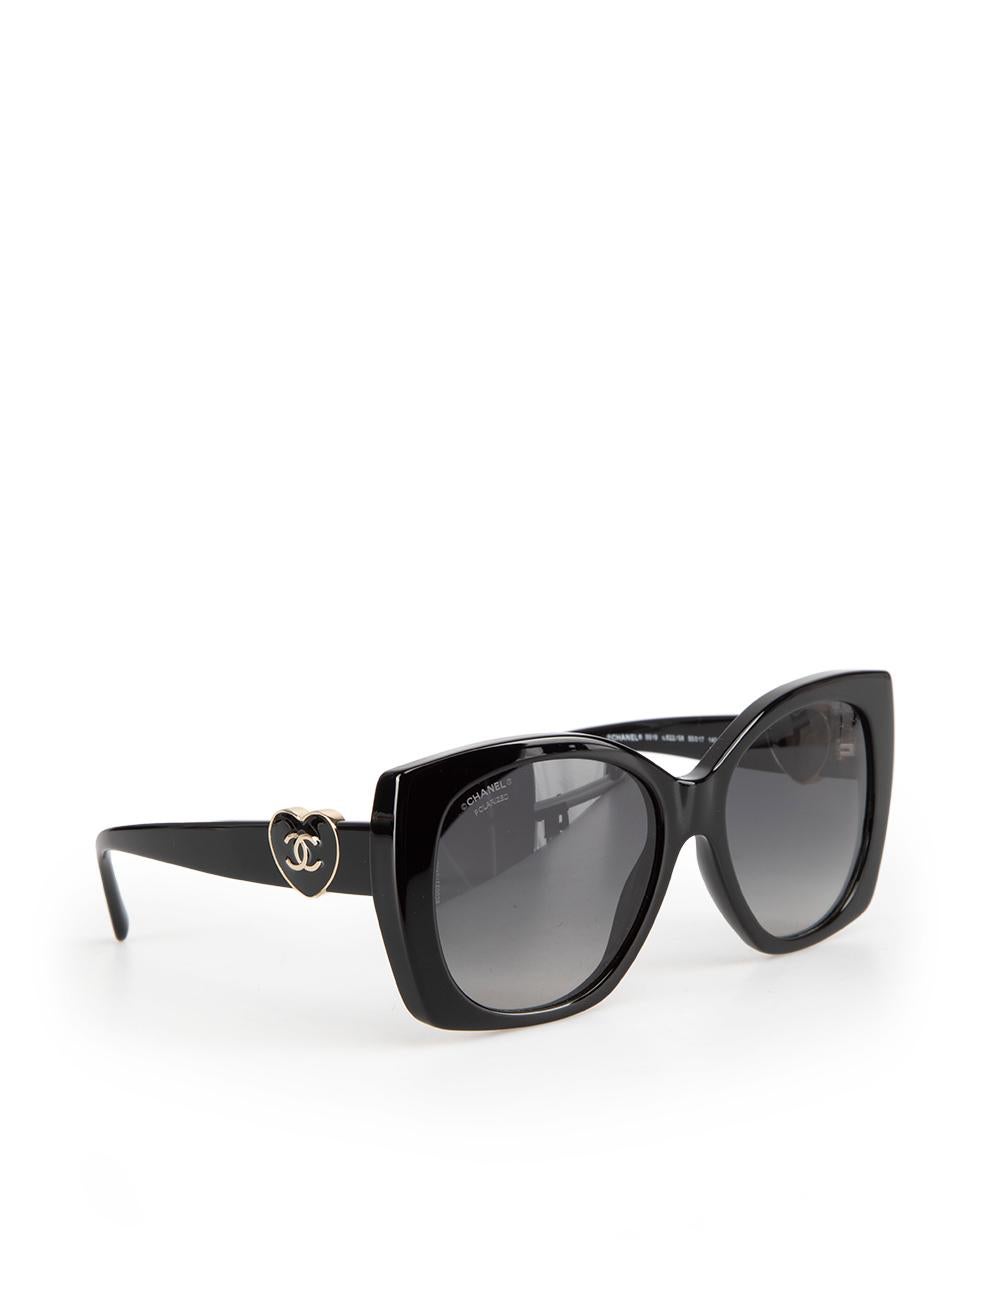 Chanel Black Square Heart Detail Sunglasses In New Condition For Sale In London, GB